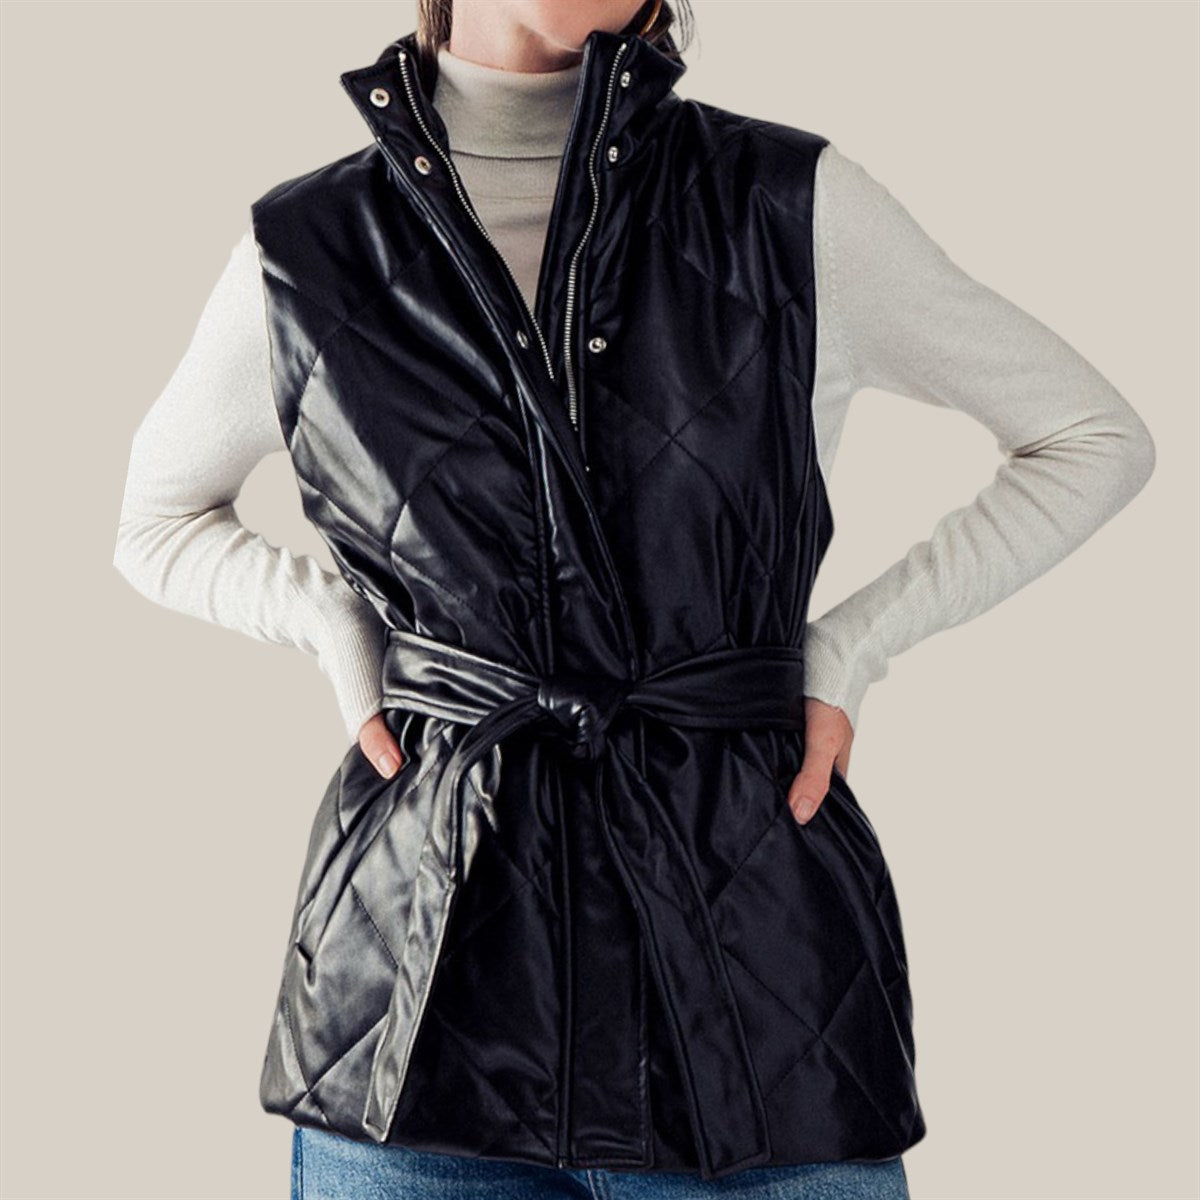 Belted Faux Leather Diamond Quilted Puffer Vest